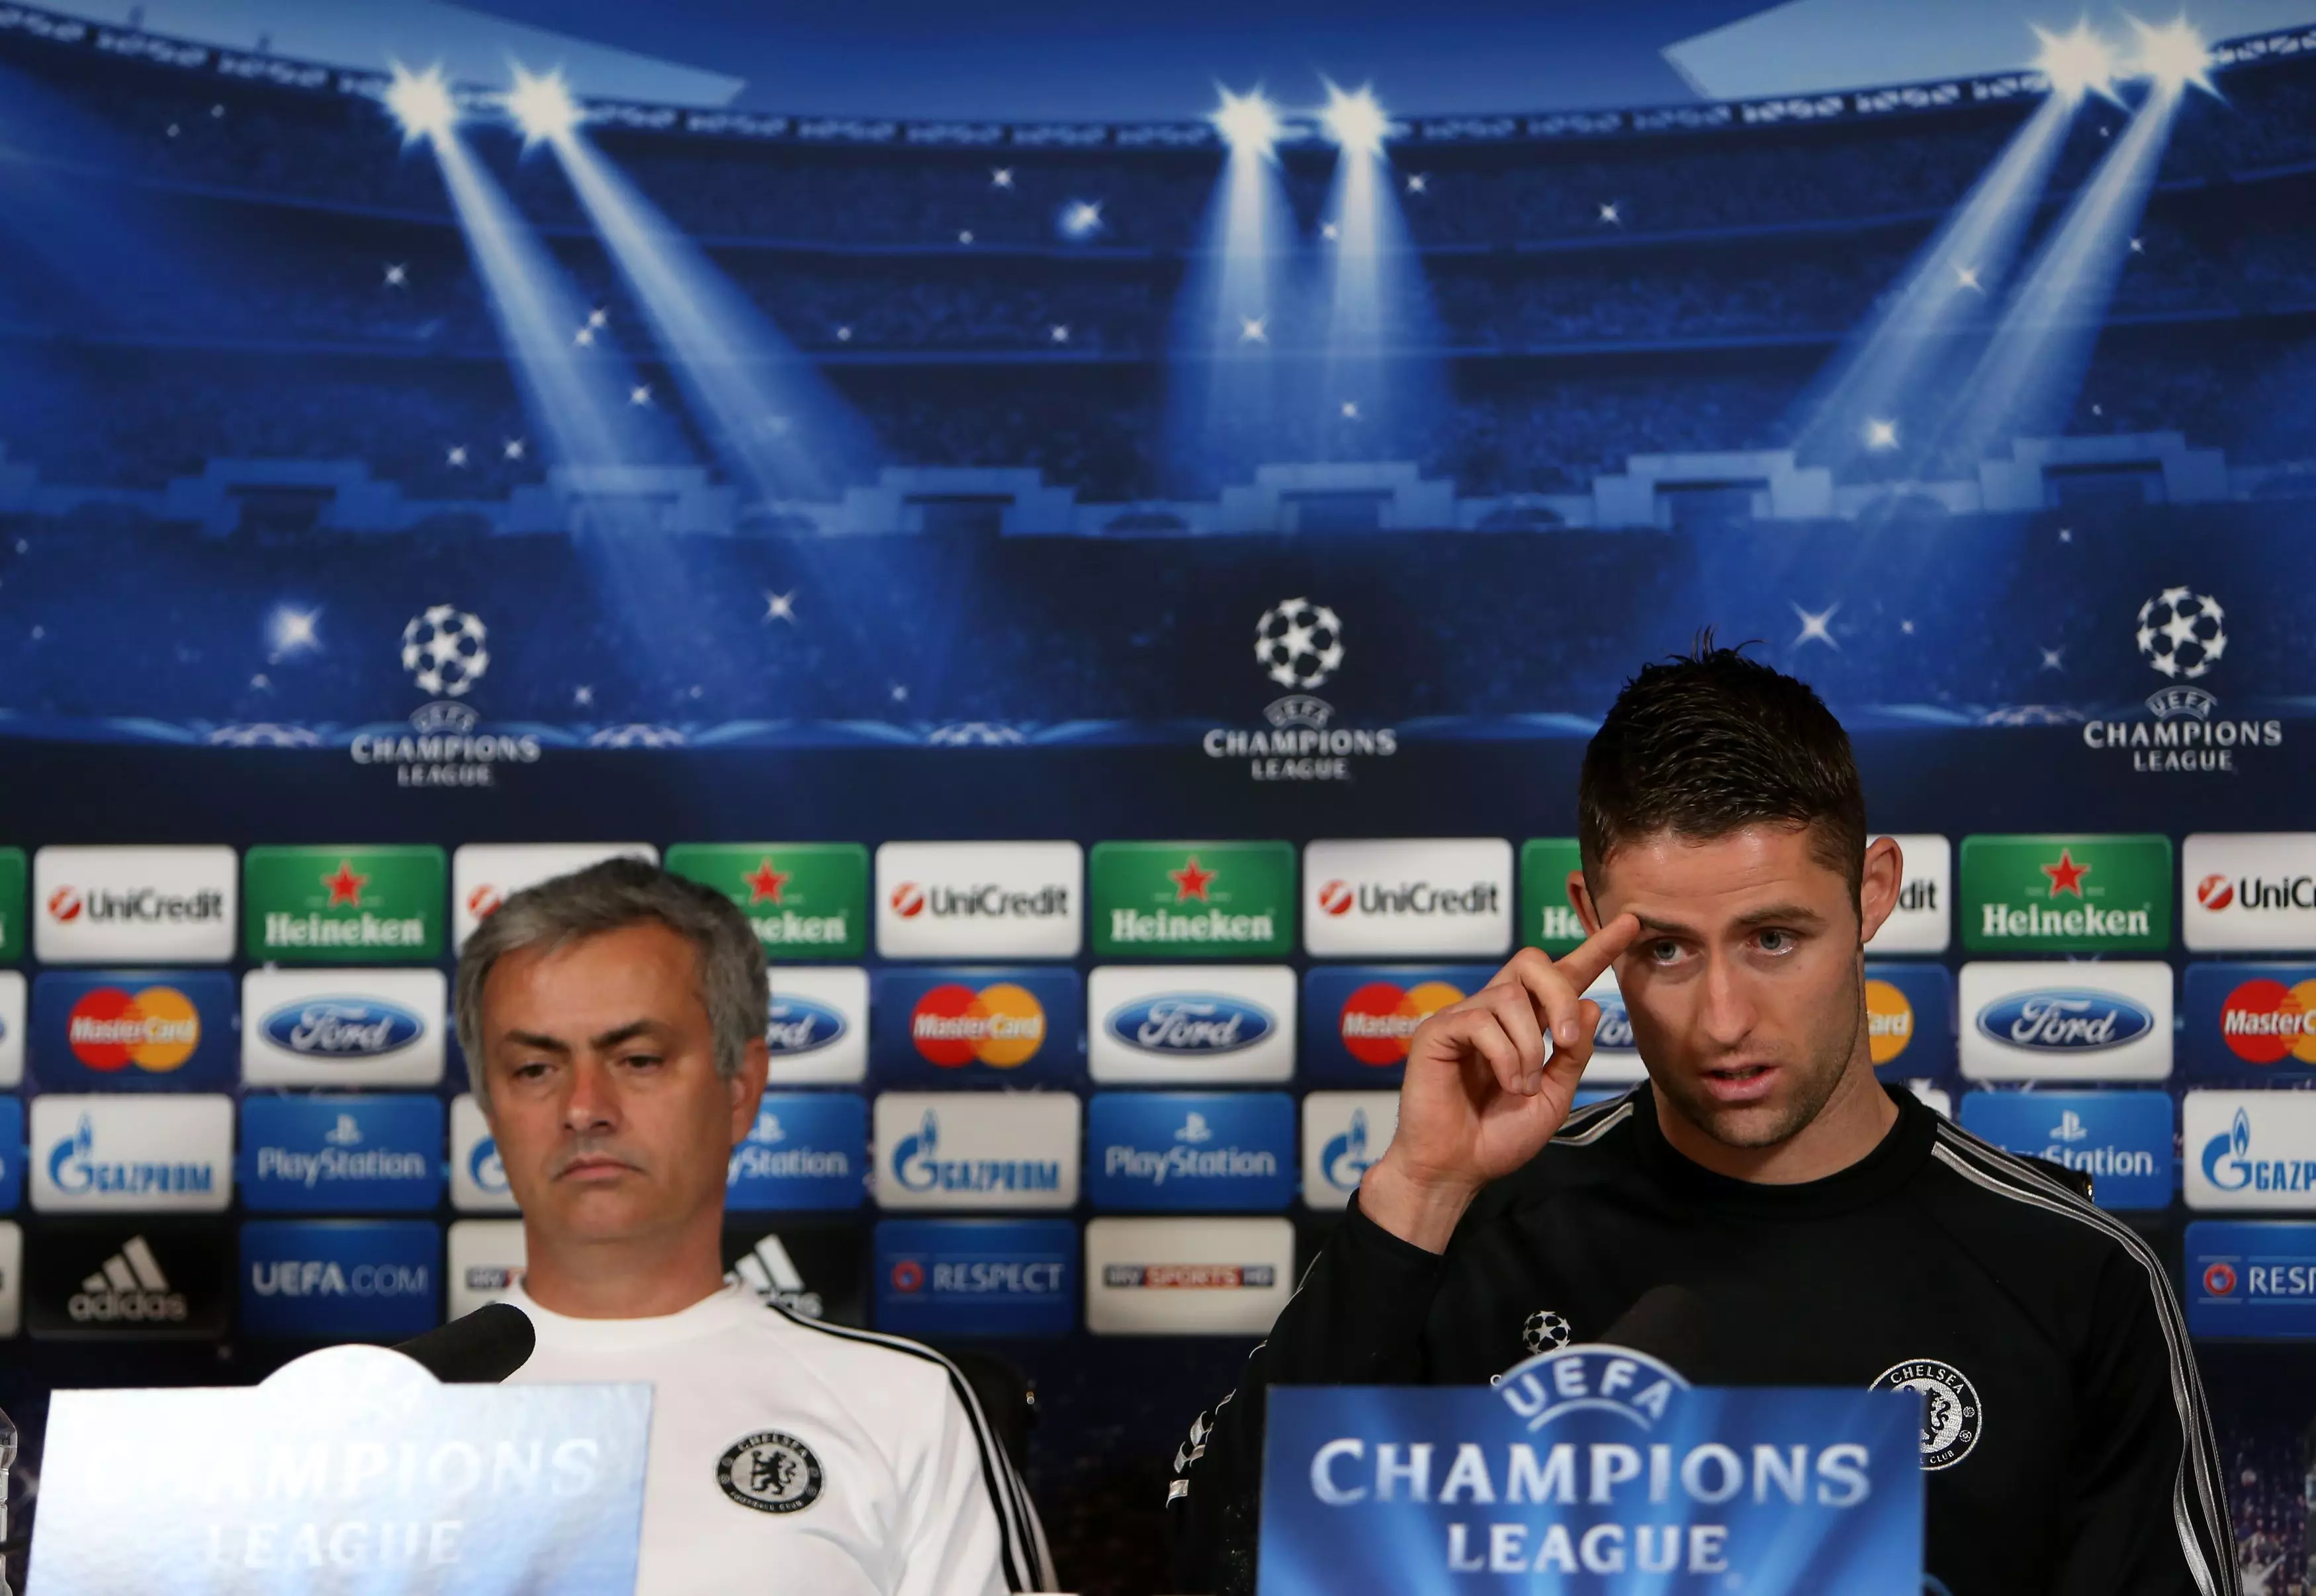 Mourinho looks bored of Cahill already. Image: PA Images